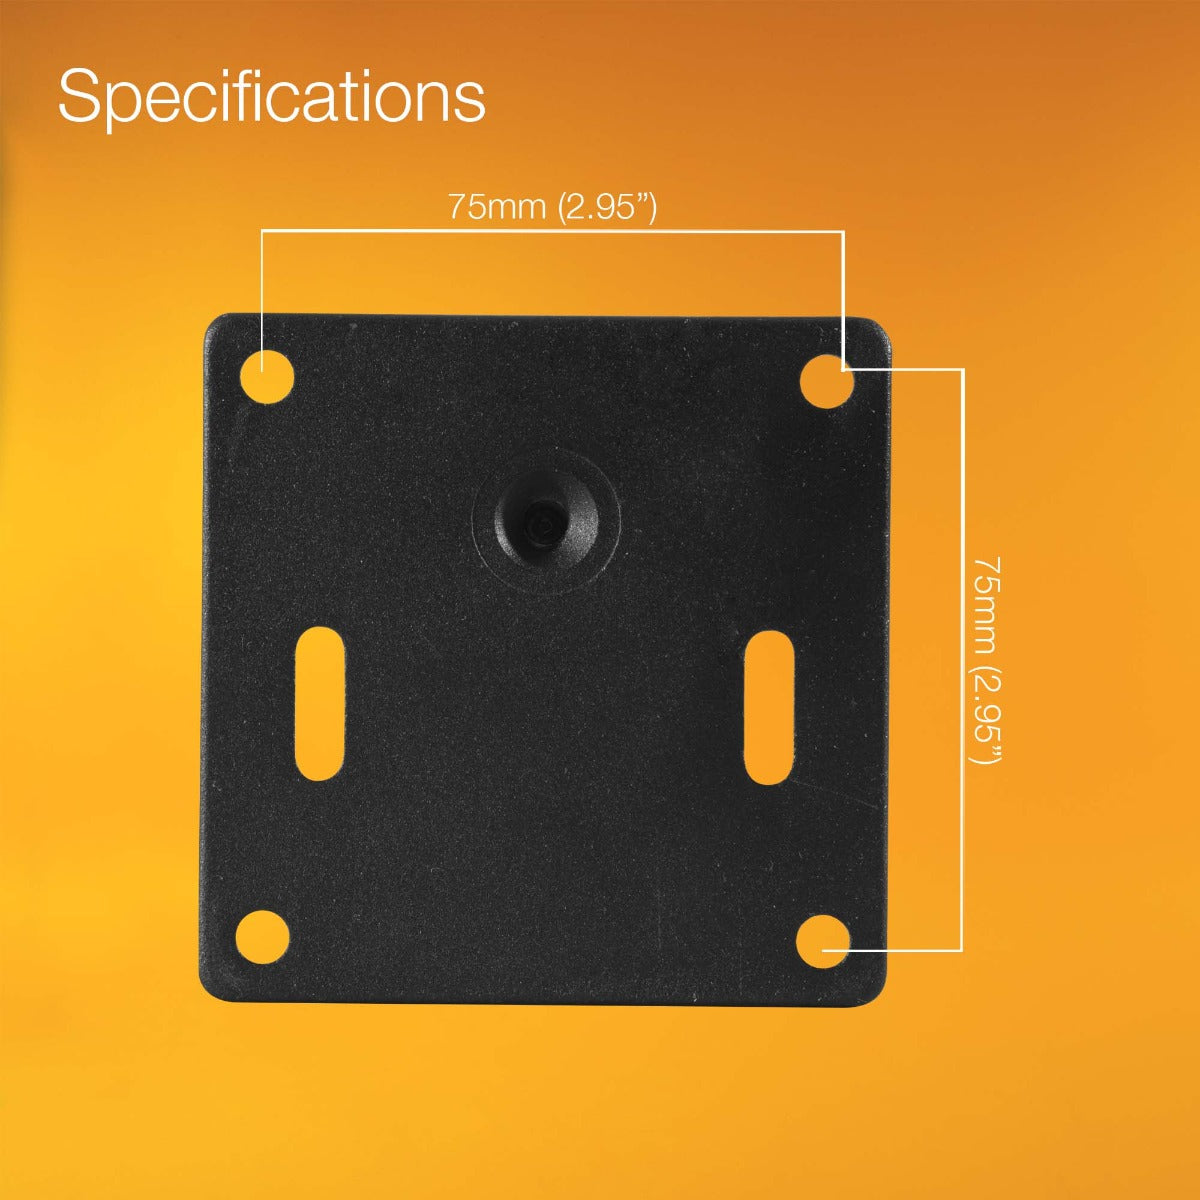 iBOLT™ 38mm / 1.5 inch to VESA 75 x 75 Ball Adapter for monitors, displays, or tv’s